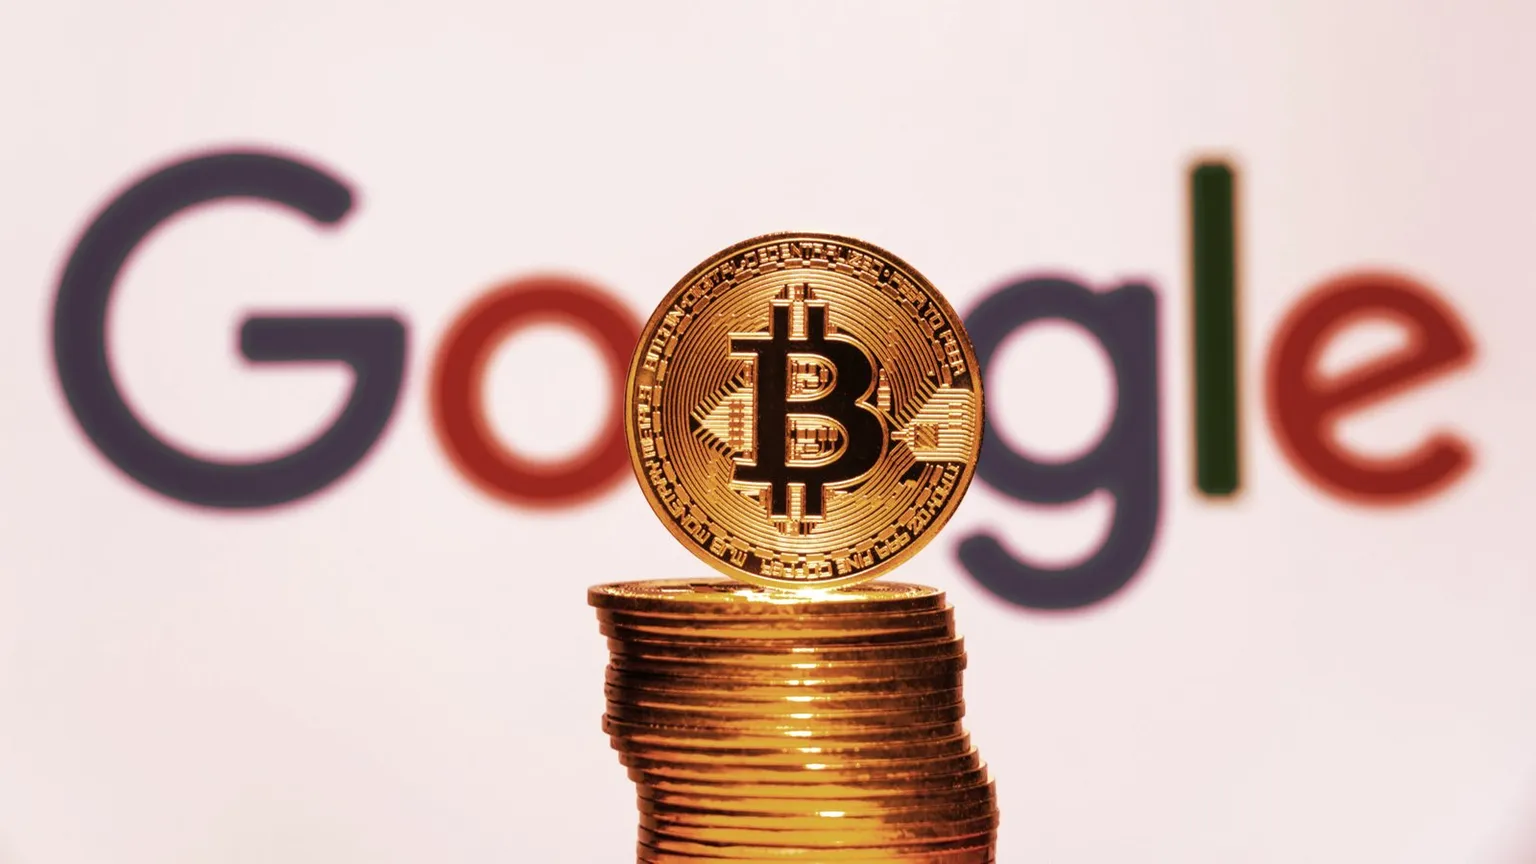 Google and Bitcoin. Image: Shutterstock